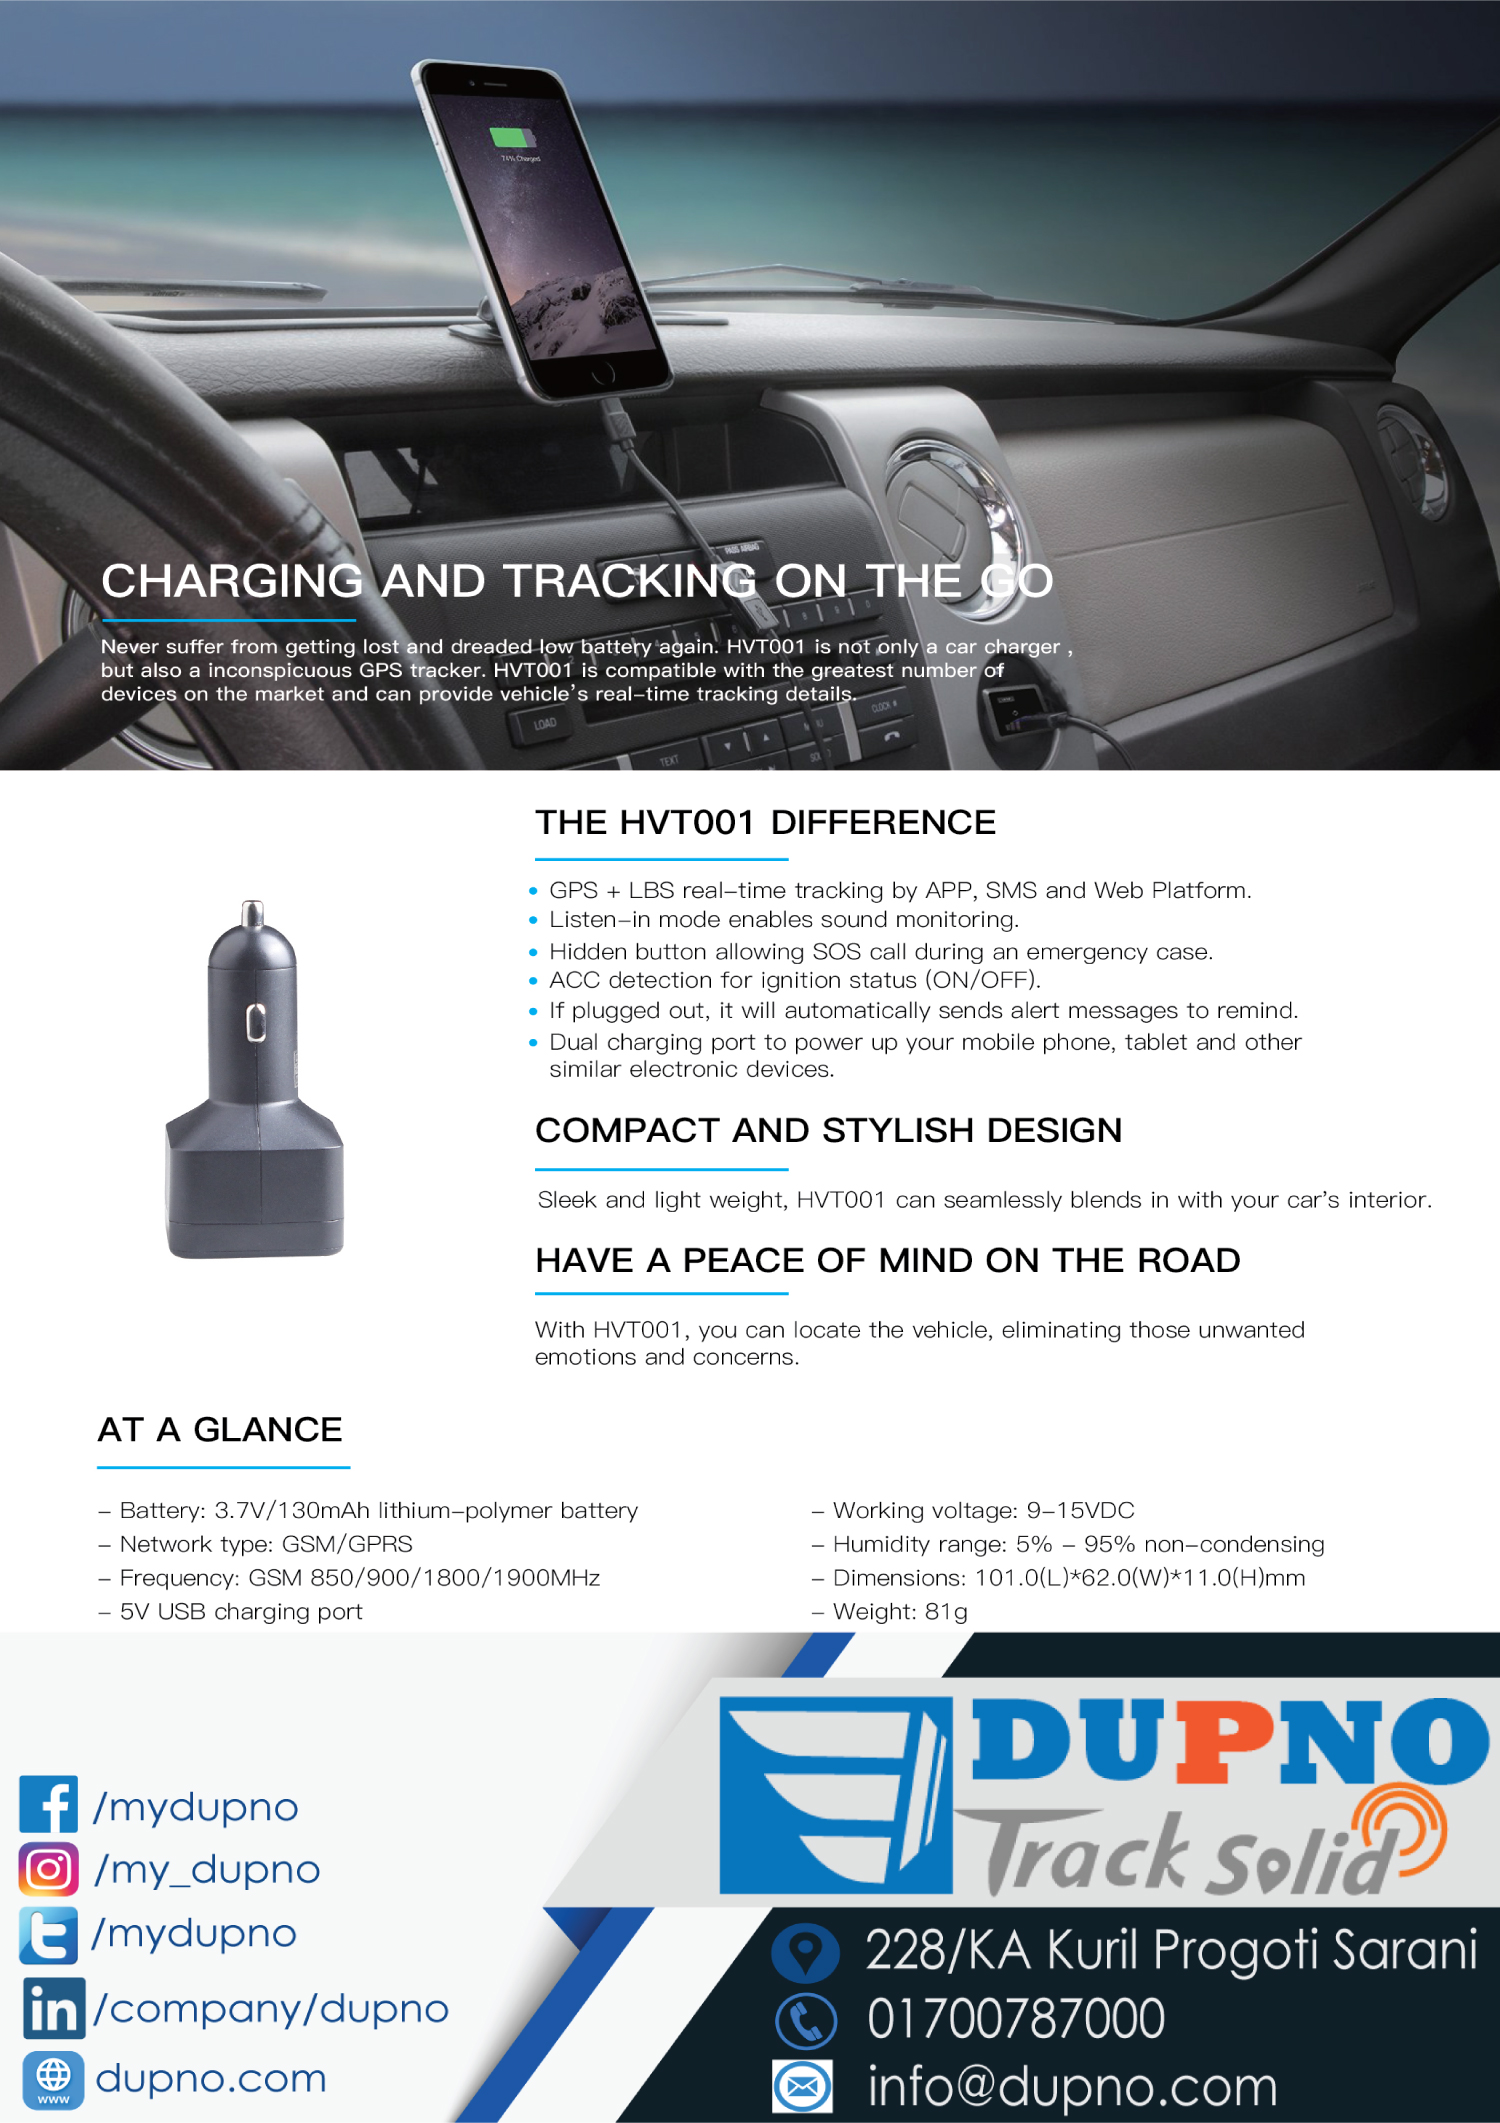 DUPNO best GPS tracking service in Bangladesh with latest and advanced IoT Devices and Platform with Web, iOS and Android Mobile Apps